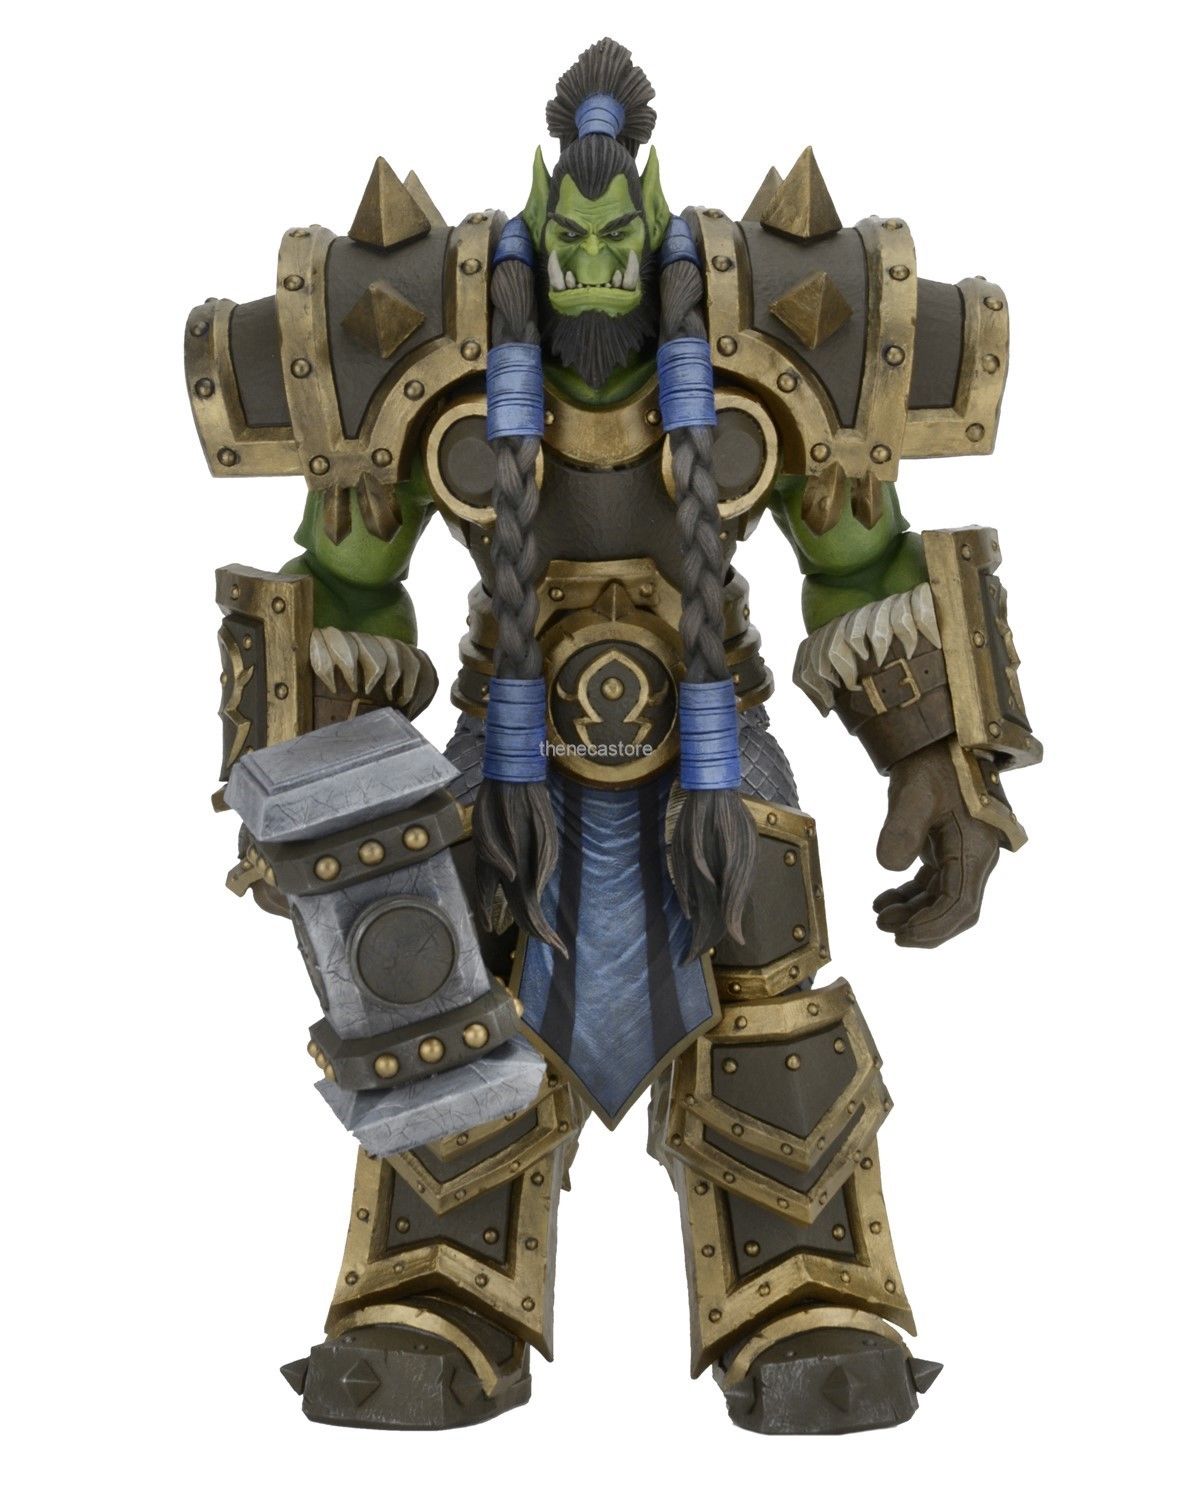 Heroes of the Storm - 7" Scale Action Figure - Thrall  - NECA Blizzard